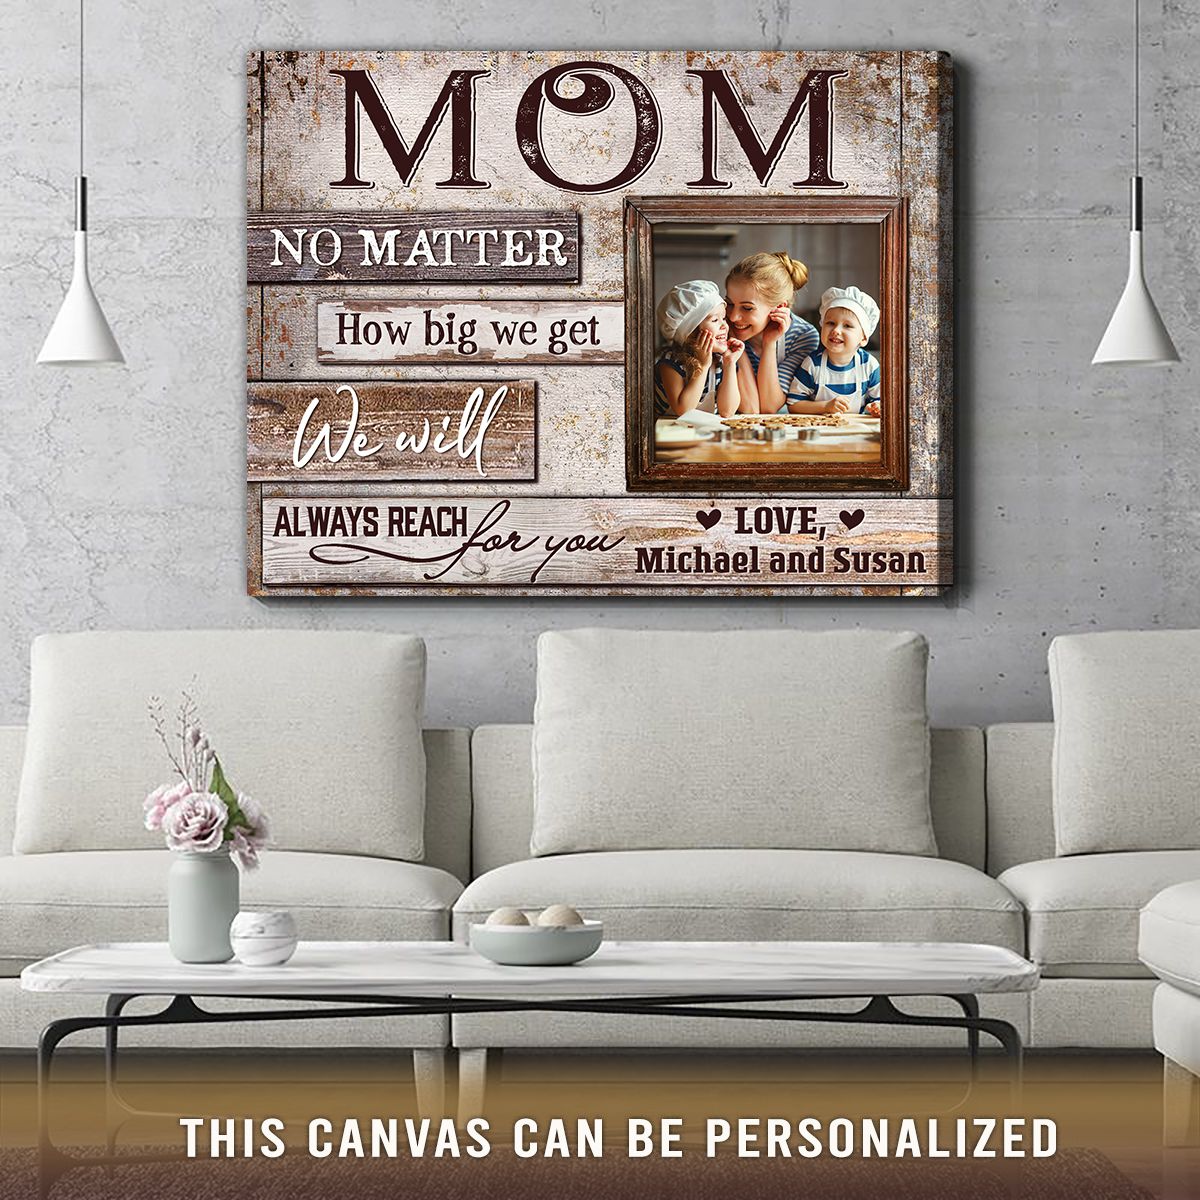 https://images.ohcanvas.com/ohcanvas_com/2022/04/15000845/thoughtful-gift-for-mom-on-birthday-personalized-mothers-day-wall-art-decor01.jpg